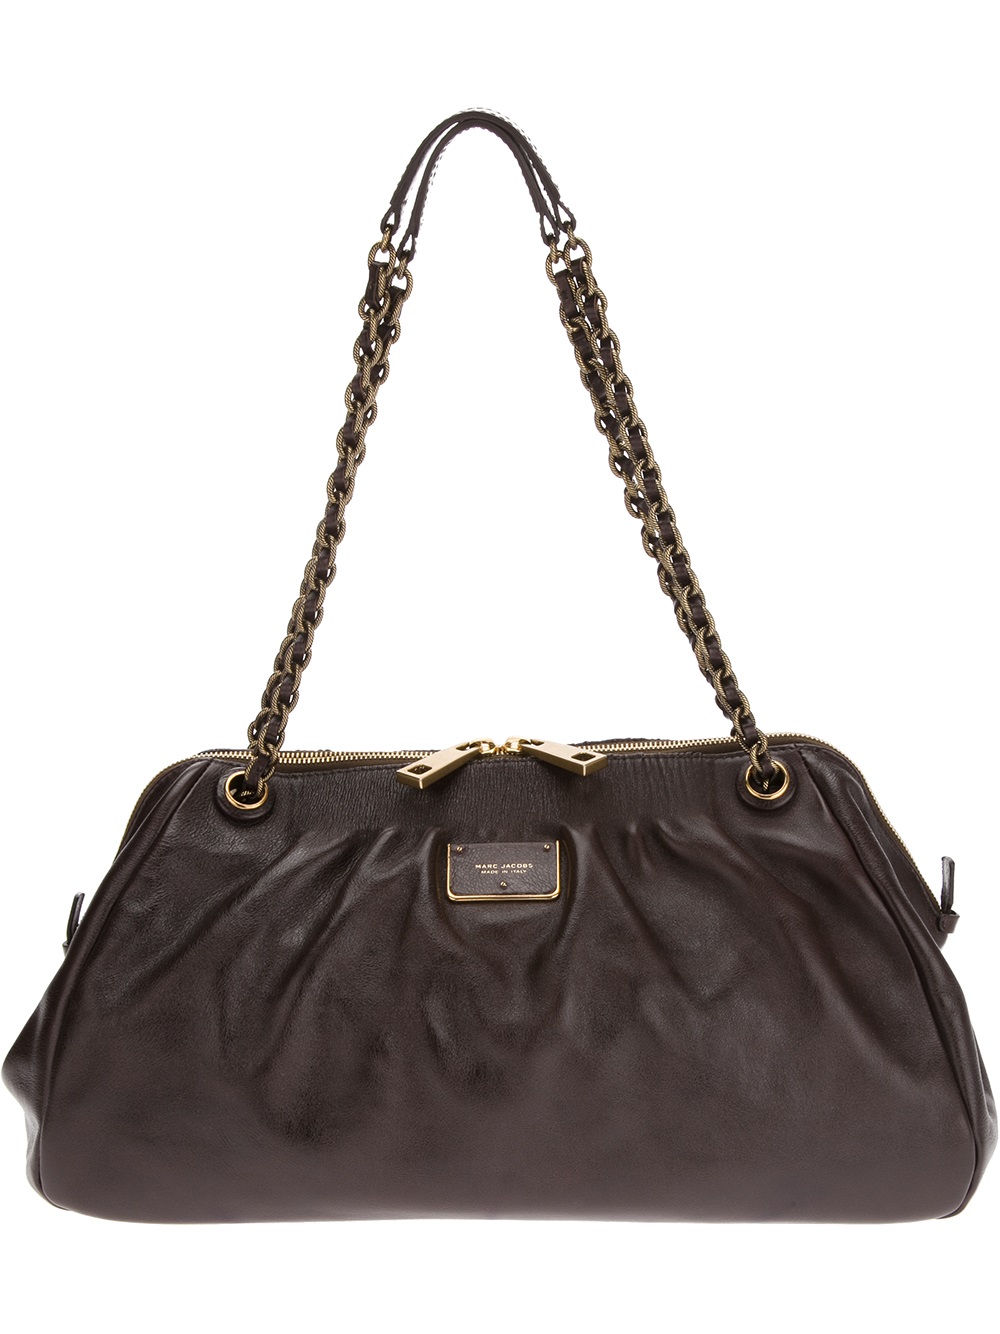 Marc Jacobs Chain Strap Shoulder Bag in Brown - Lyst